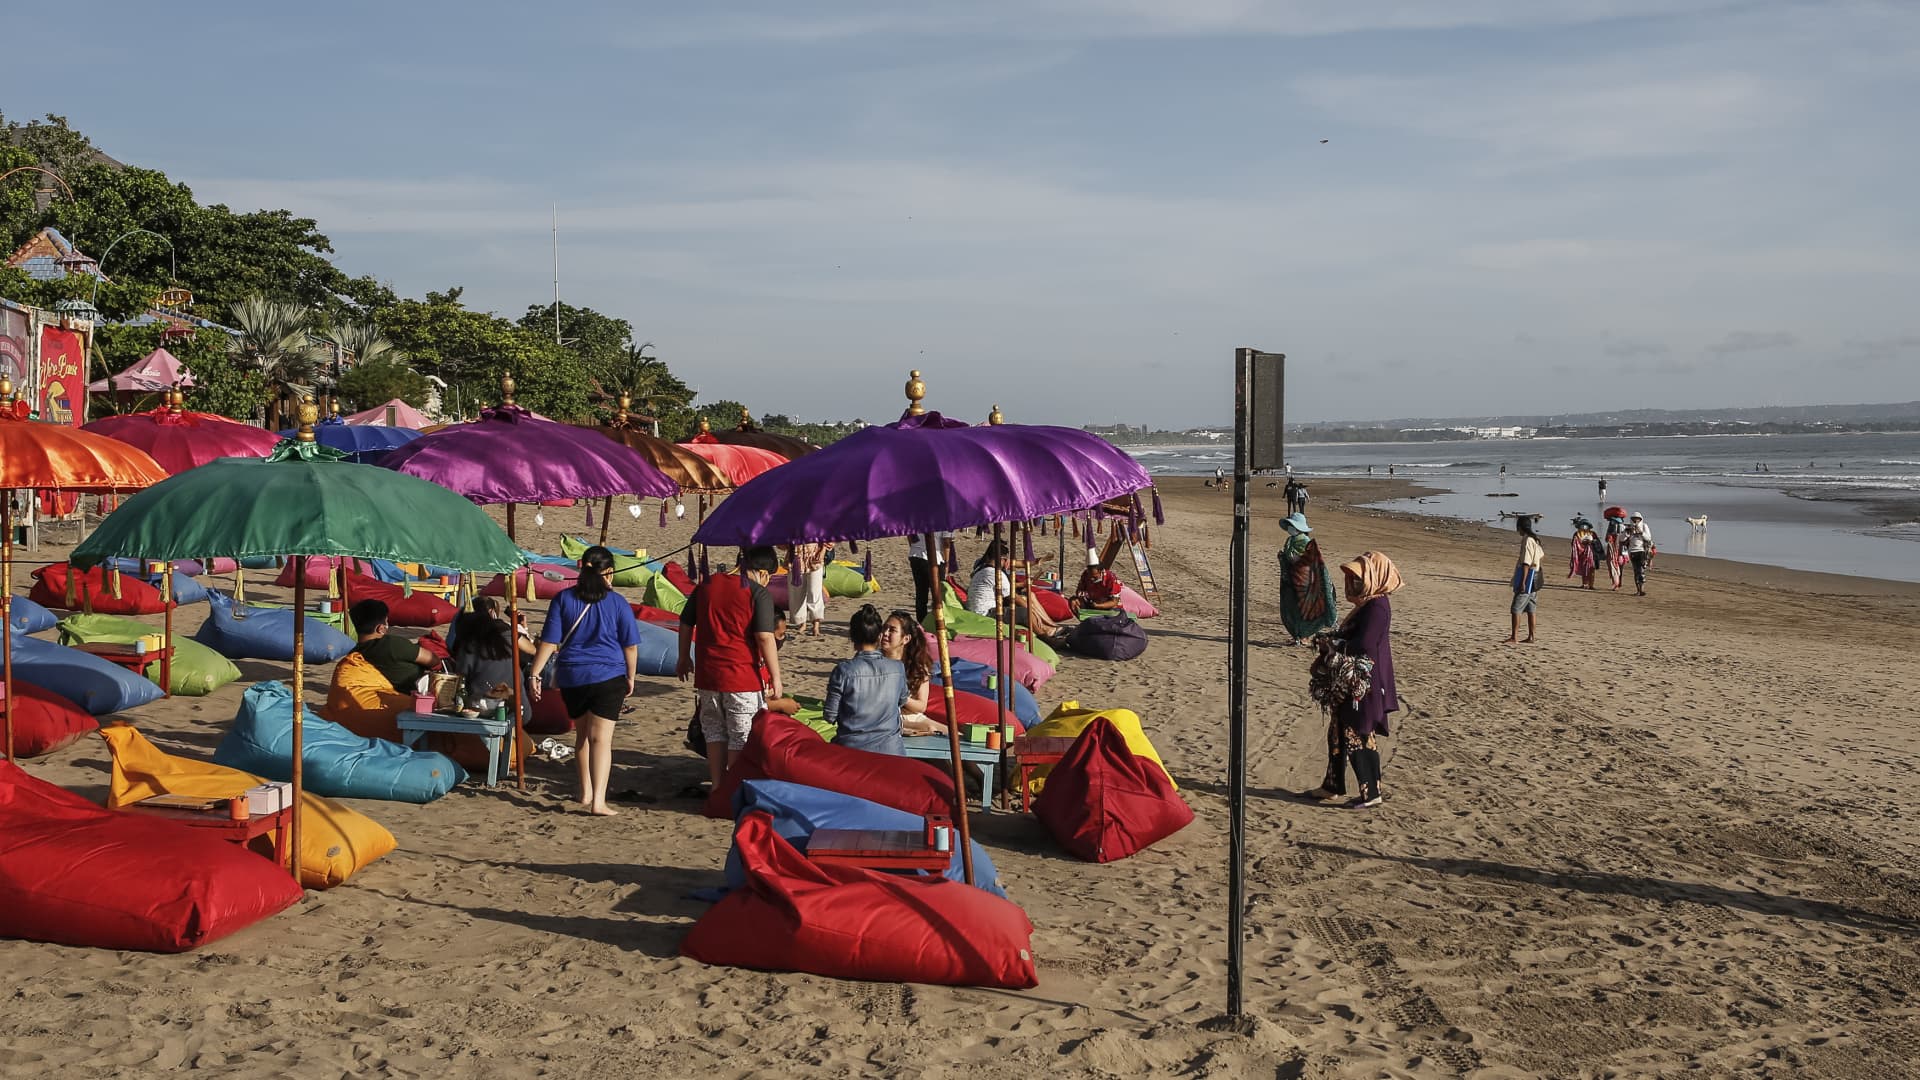 As of this month, Bali is on track to open to international tourists in October.